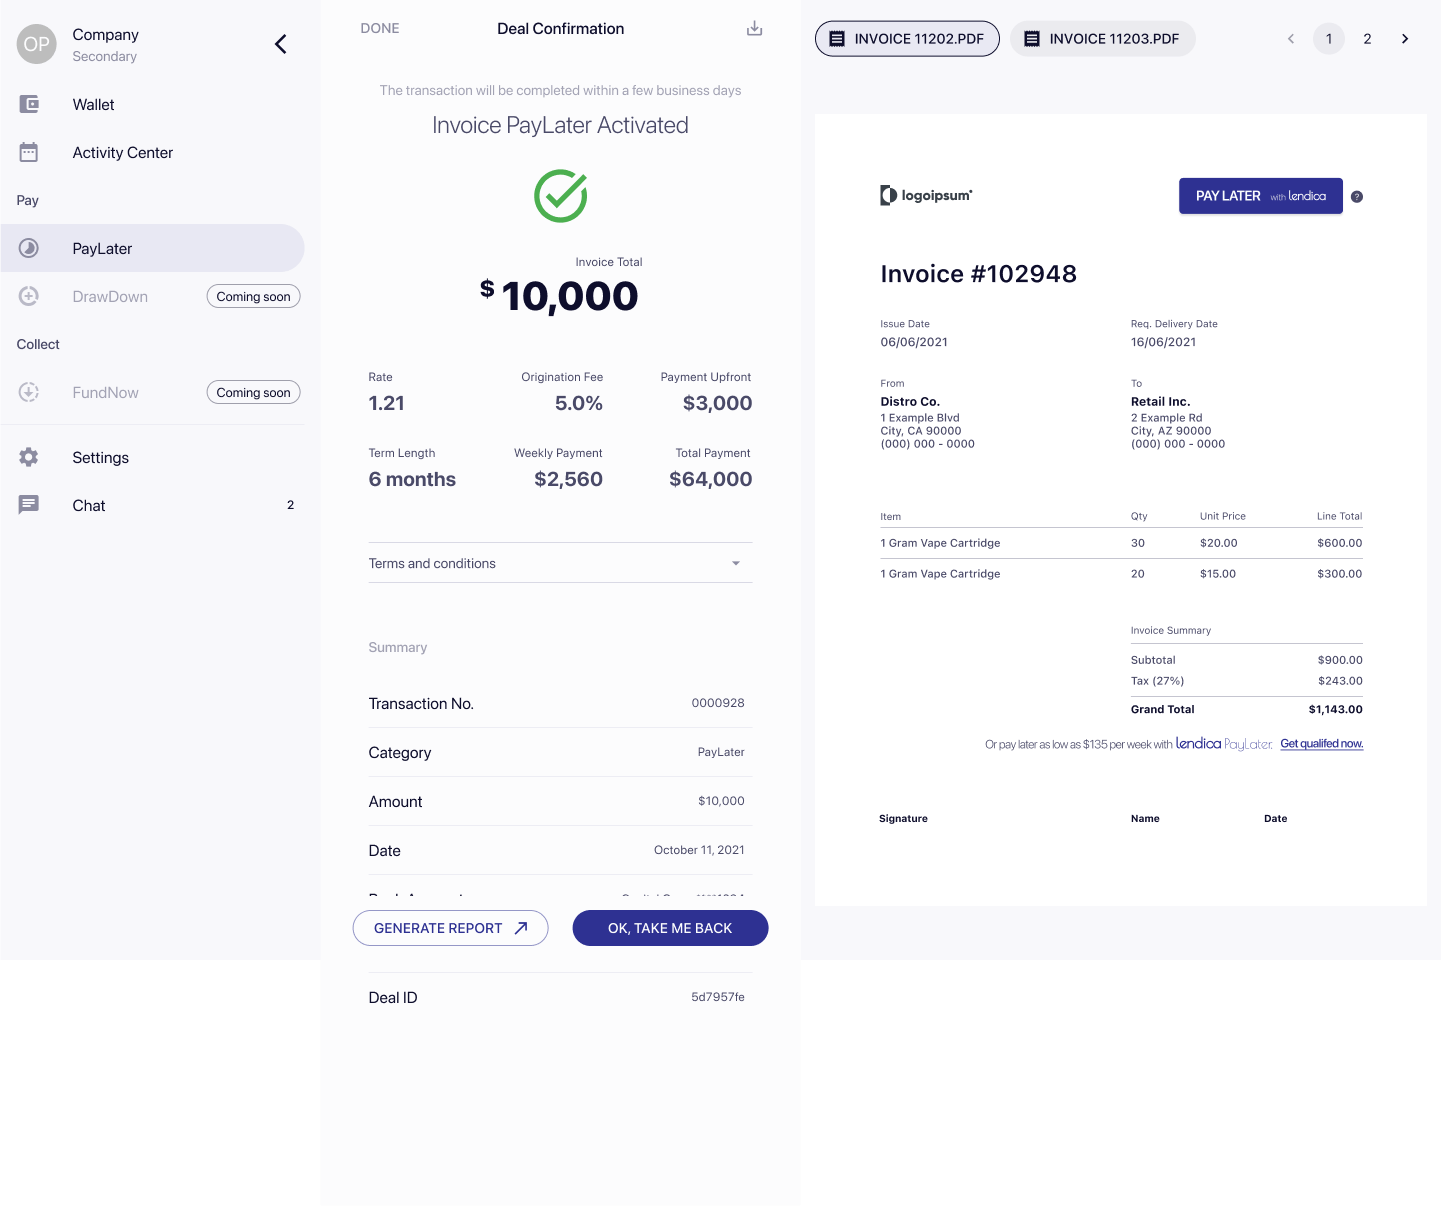 A screenshot of a demo lendica platform is shown, with a Deal Confirmation page for an invoice - Invoice Paylater has been activated